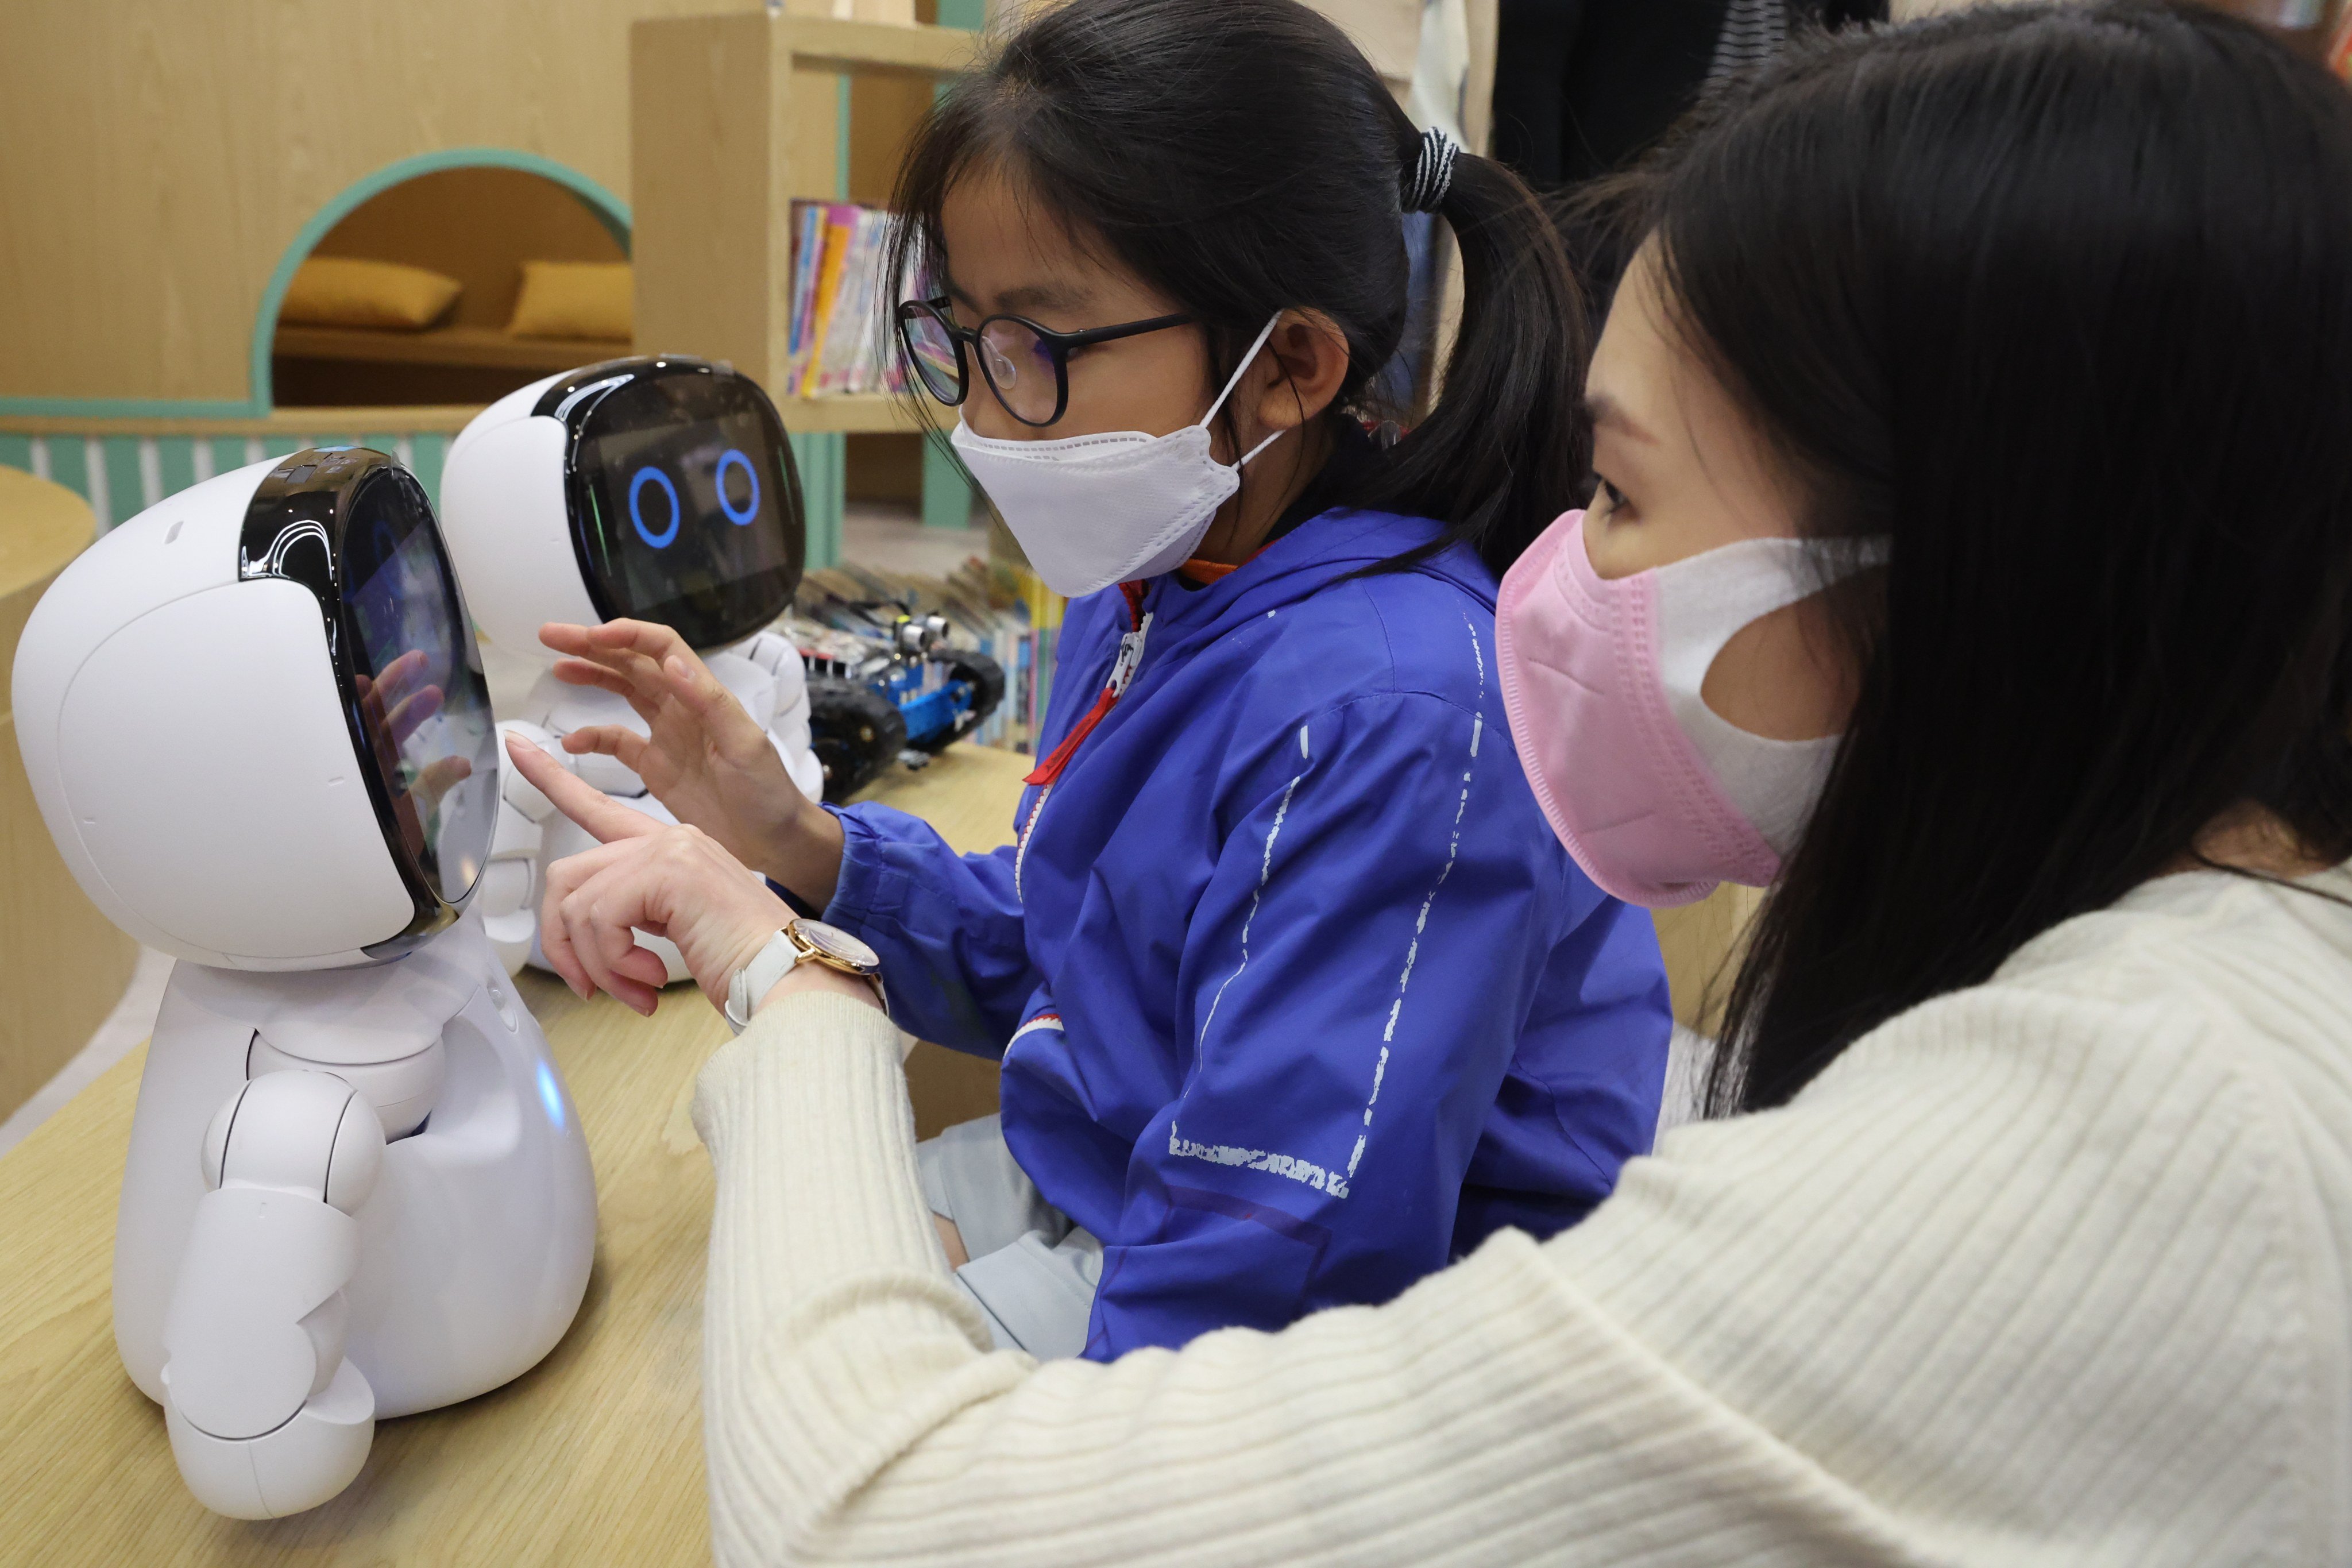 A teacher and student play with a robot at Asbury Methodist Primary School in Kwai Chung on November 4, 2022. The heavy focus on STEM education in Hong Kong has come at the expense of liberal arts education. Photo: Edmond So